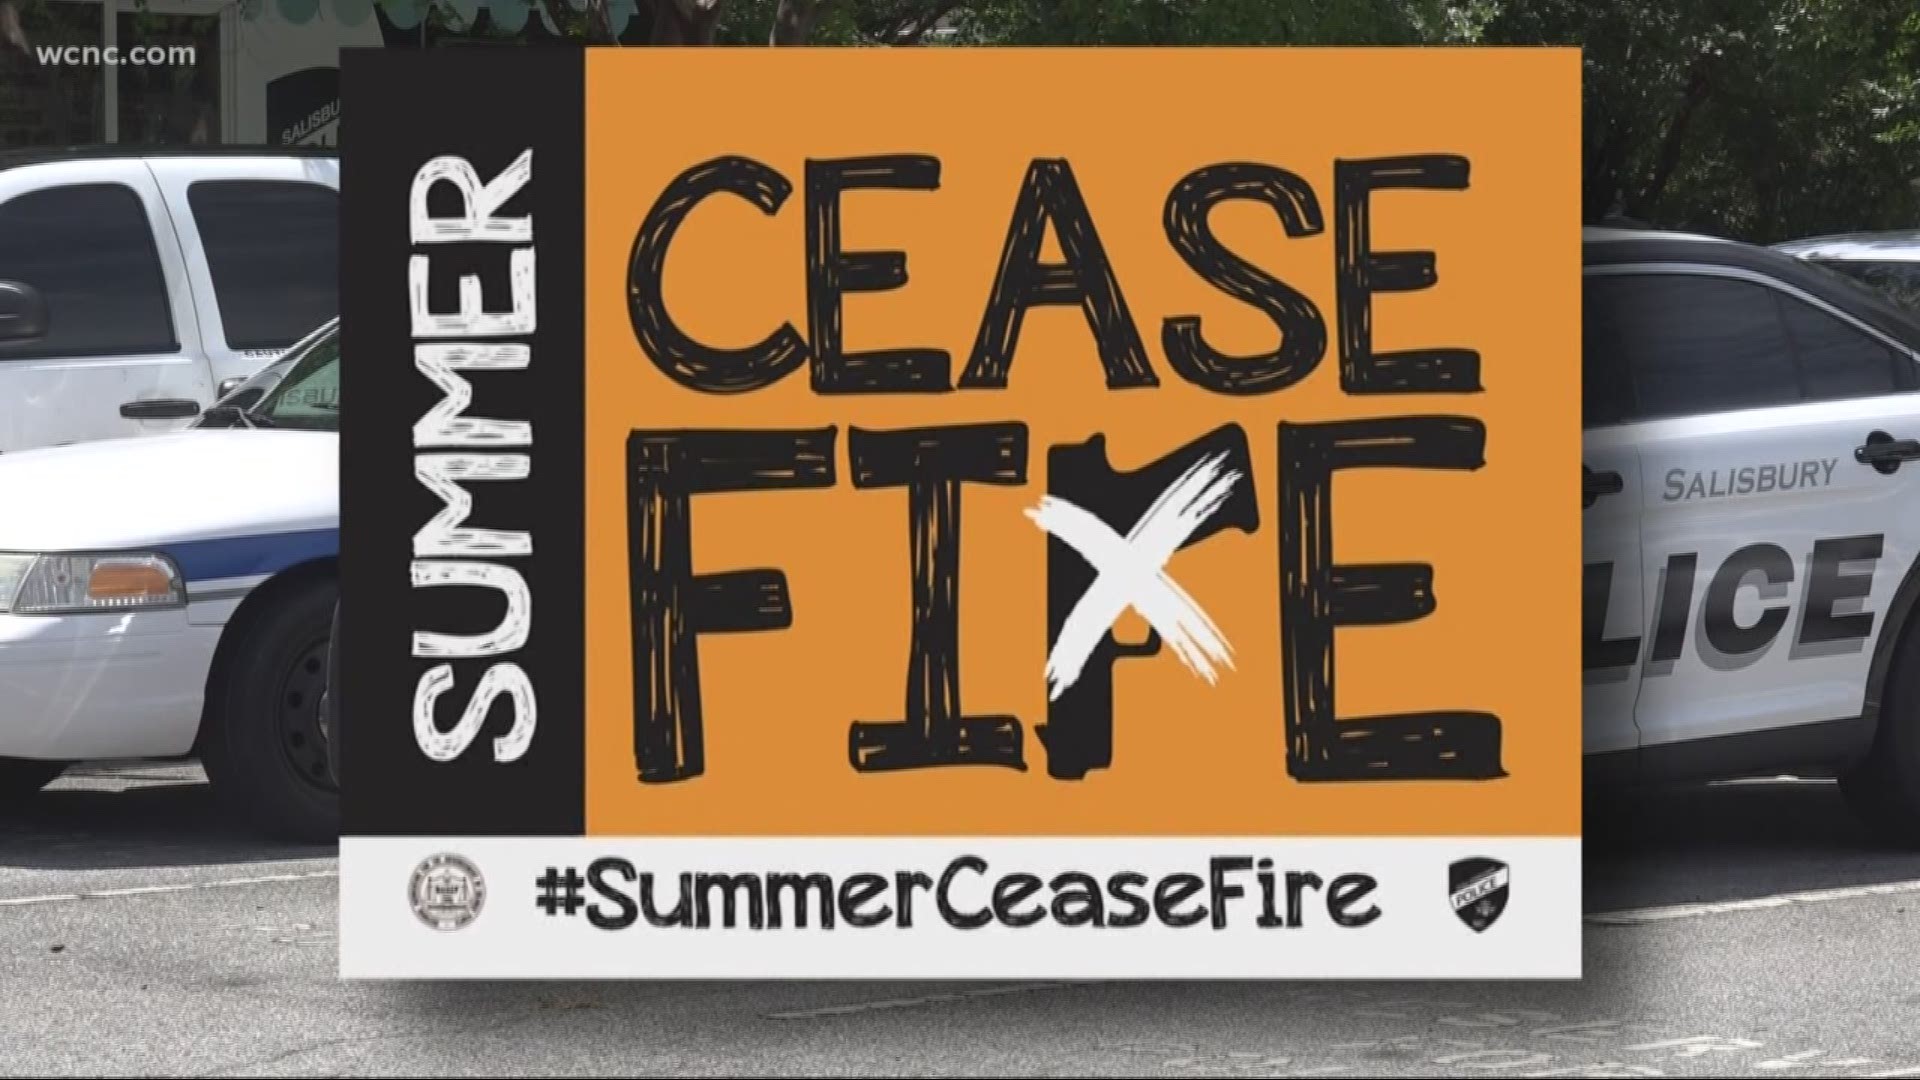 The Salisbury Police Department announced a 'Summer Cease Fire' campaign to stop gun-related assaults. The goal is to identify areas prone to violence and train community members to be "de-escalators."